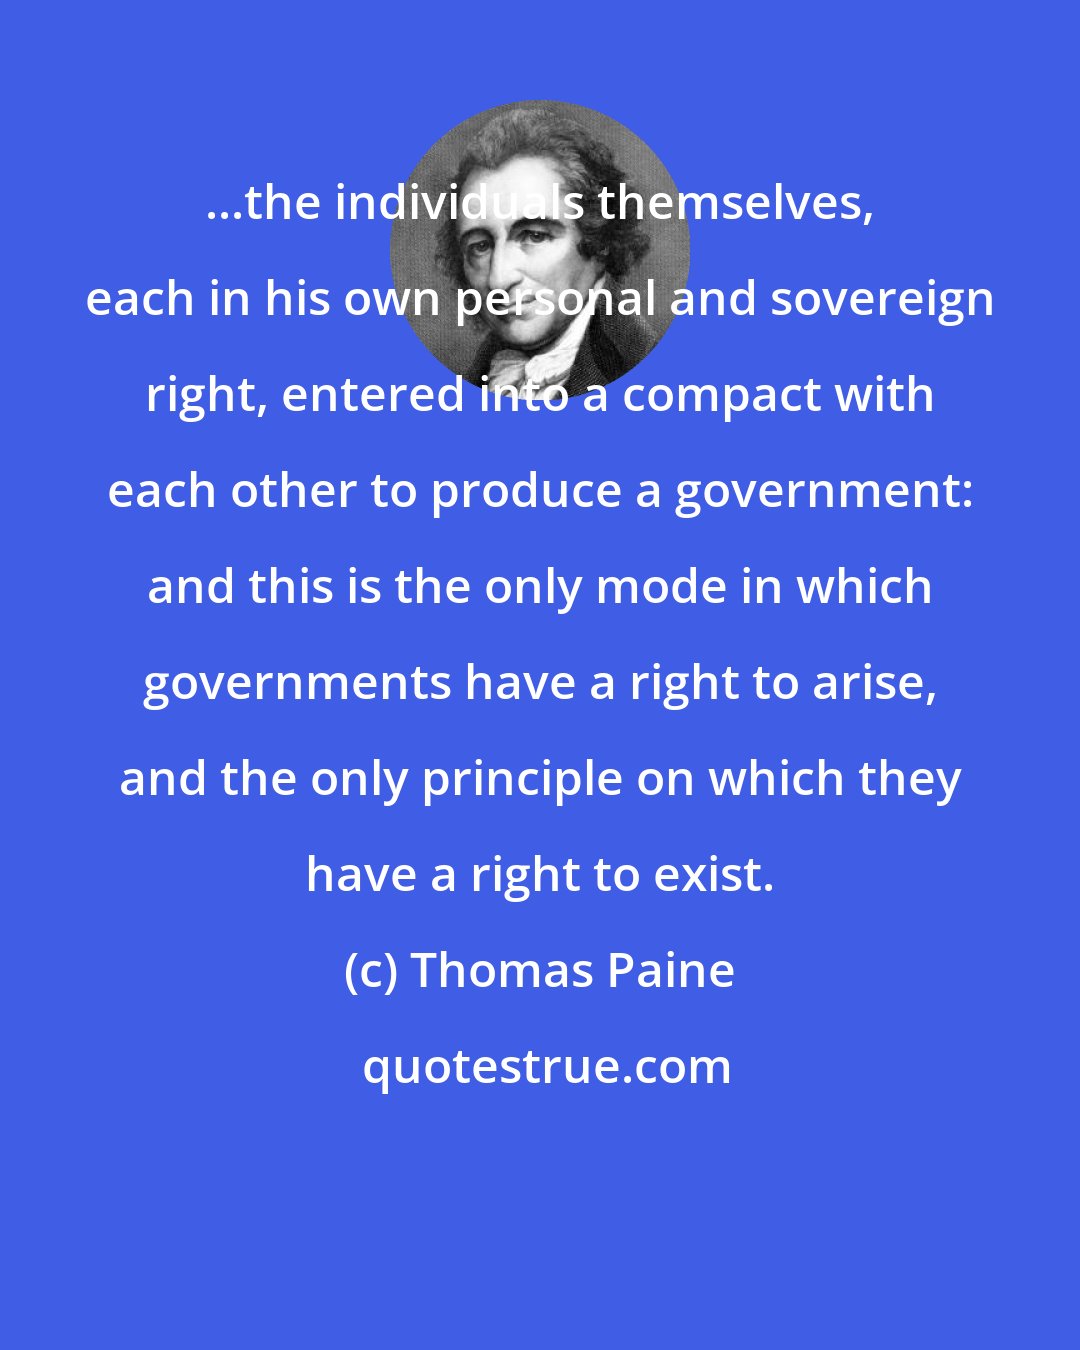 Thomas Paine: ...the individuals themselves, each in his own personal and sovereign right, entered into a compact with each other to produce a government: and this is the only mode in which governments have a right to arise, and the only principle on which they have a right to exist.